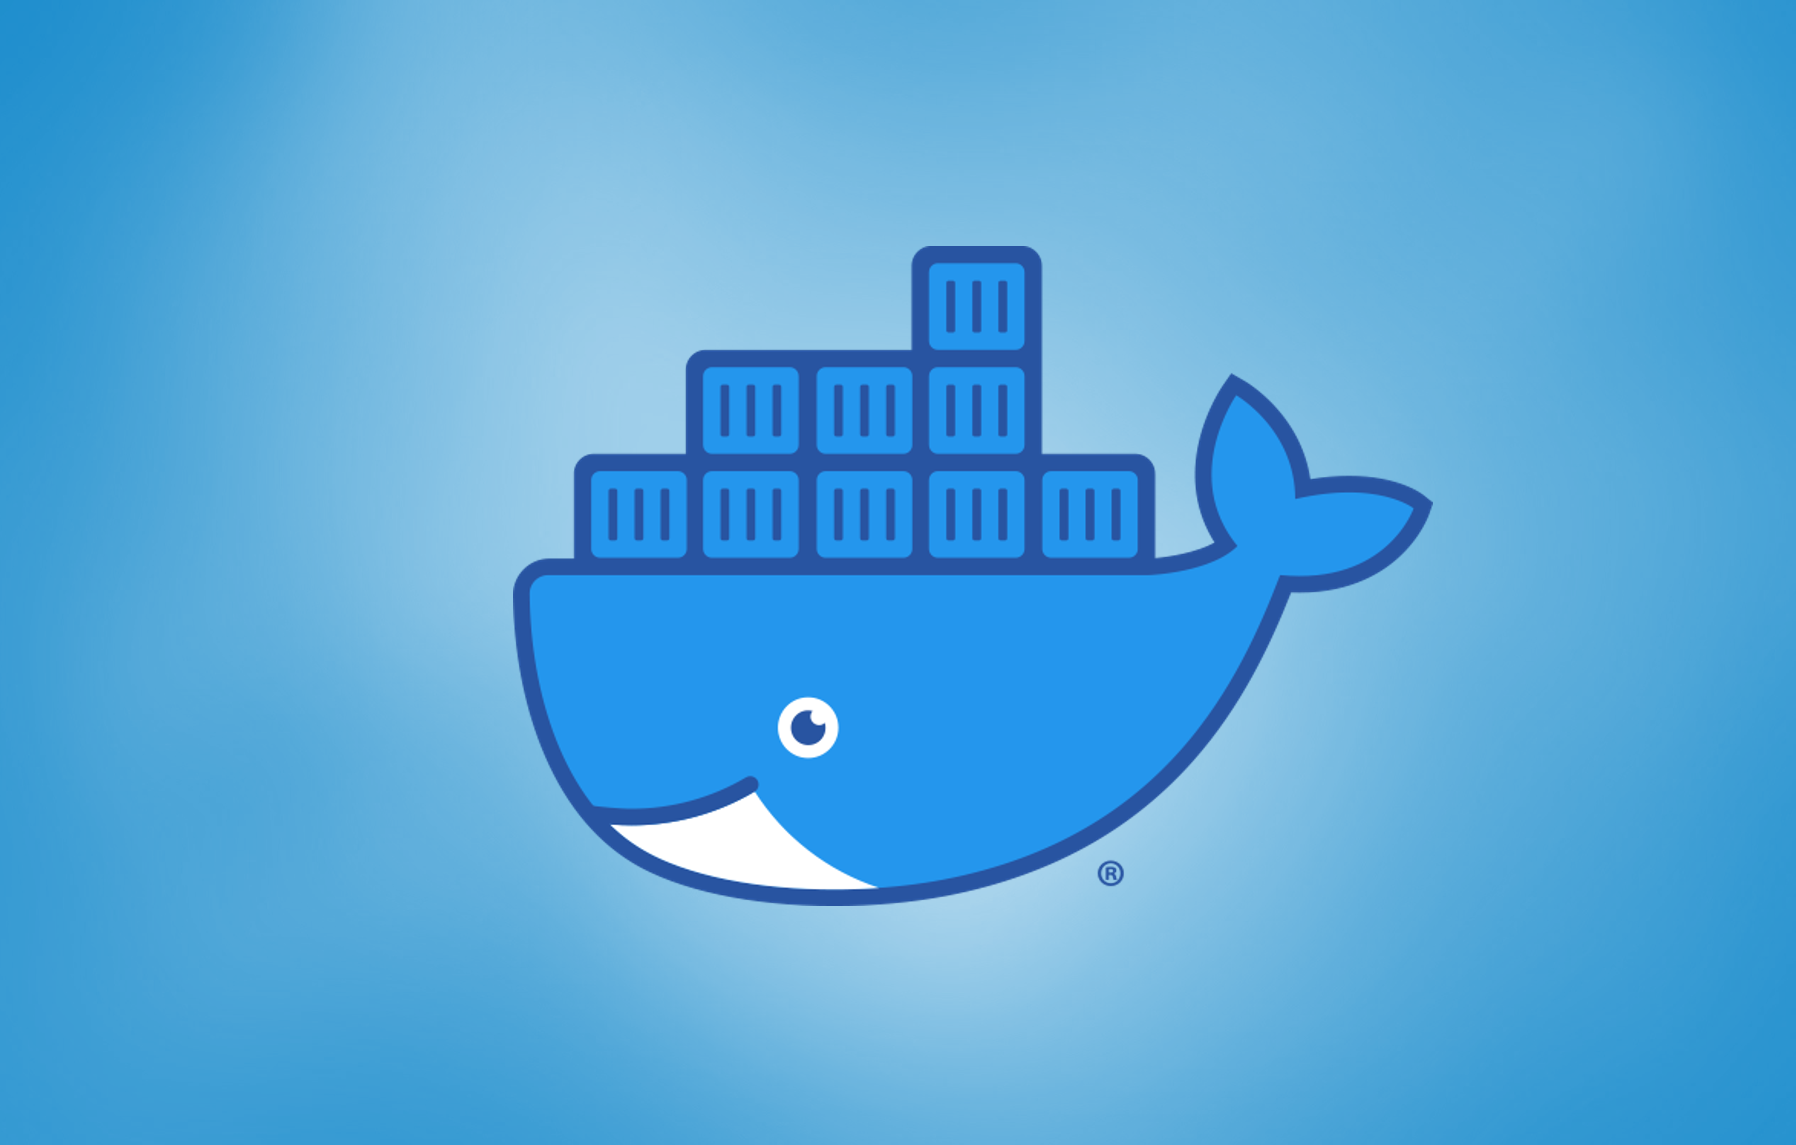 Docker is a tool that allows you to run applications in containers. Containers are like virtual machines, but they are more portable and resource-friendly. In this tutorial, you will learn what is Docker and how to install Docker in your local machine.